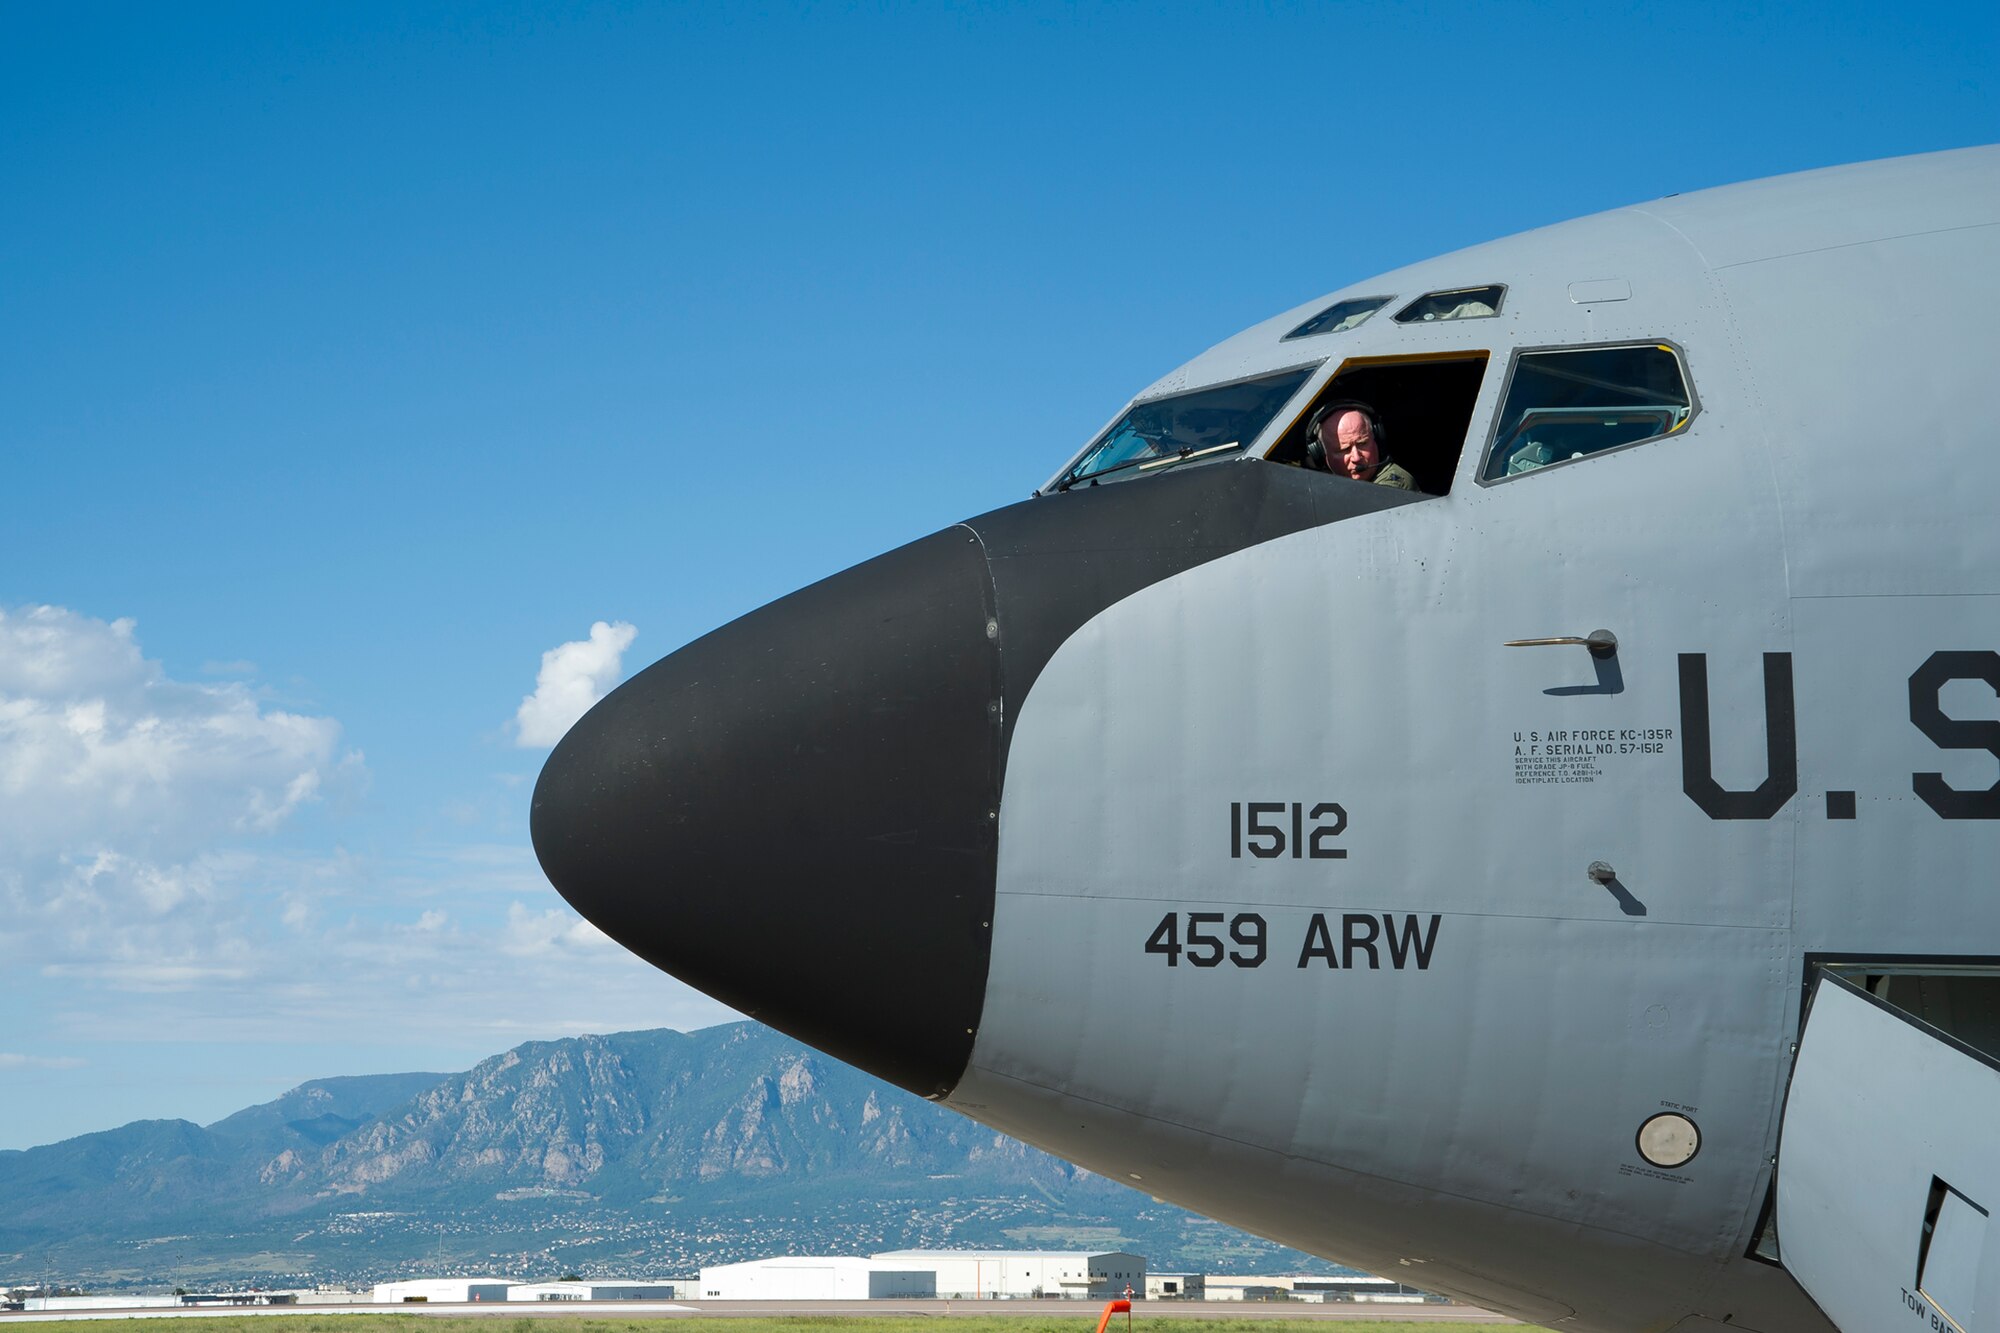 Colonel Thomas Pemberton, 459th Operations Group commander and pilot, looks out the window of a KC-135R Stratotanker during pre-flight checks on the Peterson Air Force Base, Colorado, flight line, Sunday, Aug. 28, 2016. More than a dozen 459th Aeromedical Evacuation Squadron flight nurses, technicians and administrators flew to Peterson to conduct joint unit training with other AE squadrons on board the KC-135, C-17 Globemaster III and C-130H3 Hercules. (U.S. Air Force photo/Staff Sgt. Kat Justen)